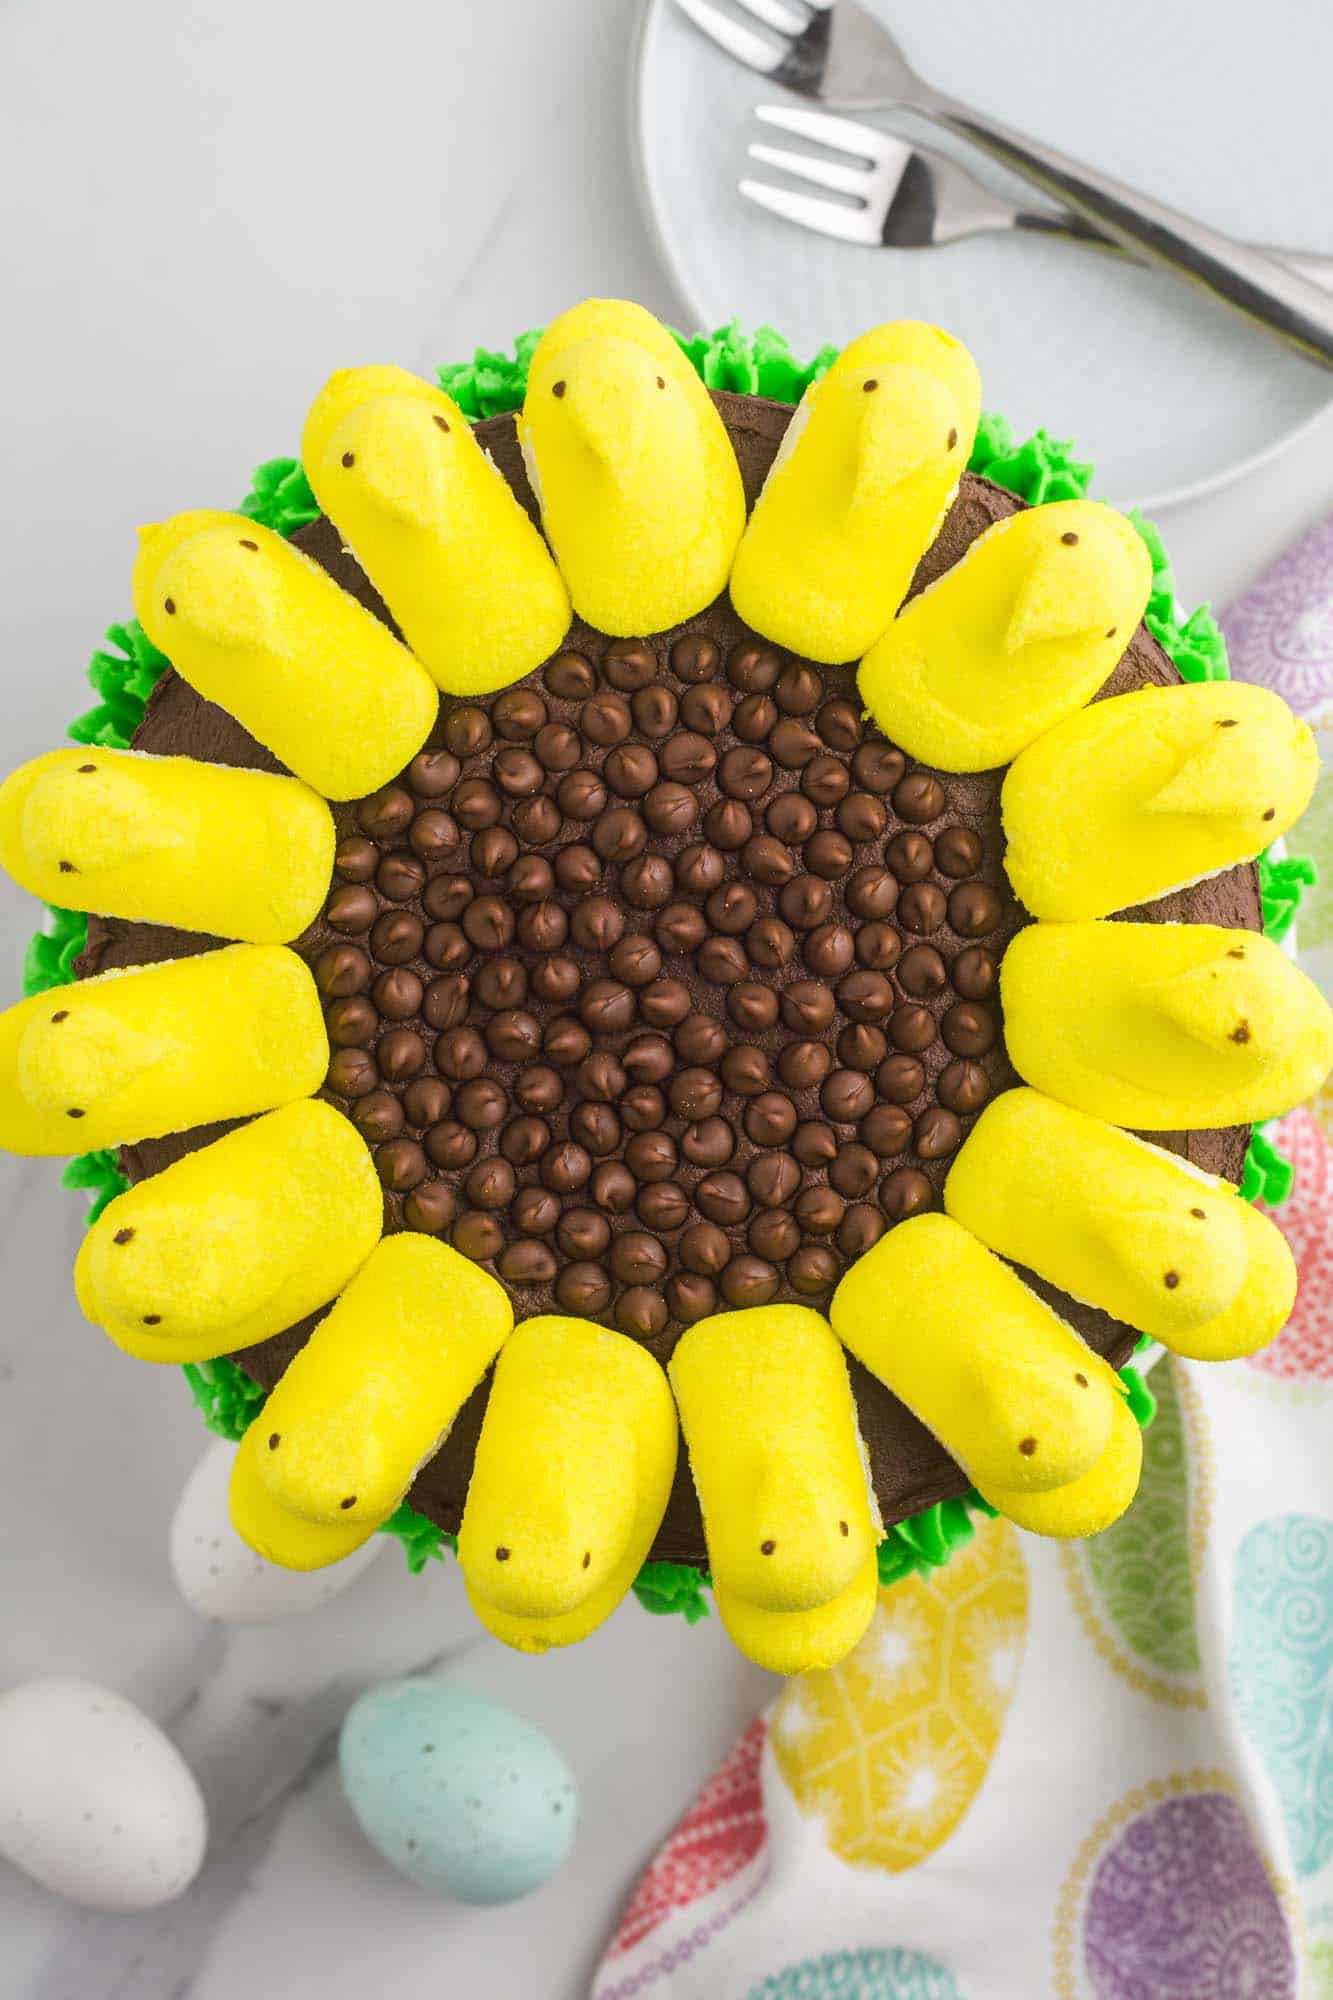 a chocolate cake viewed from above, decorated to look like a sunflower with yellow marshmallow peeps and chocolate chips